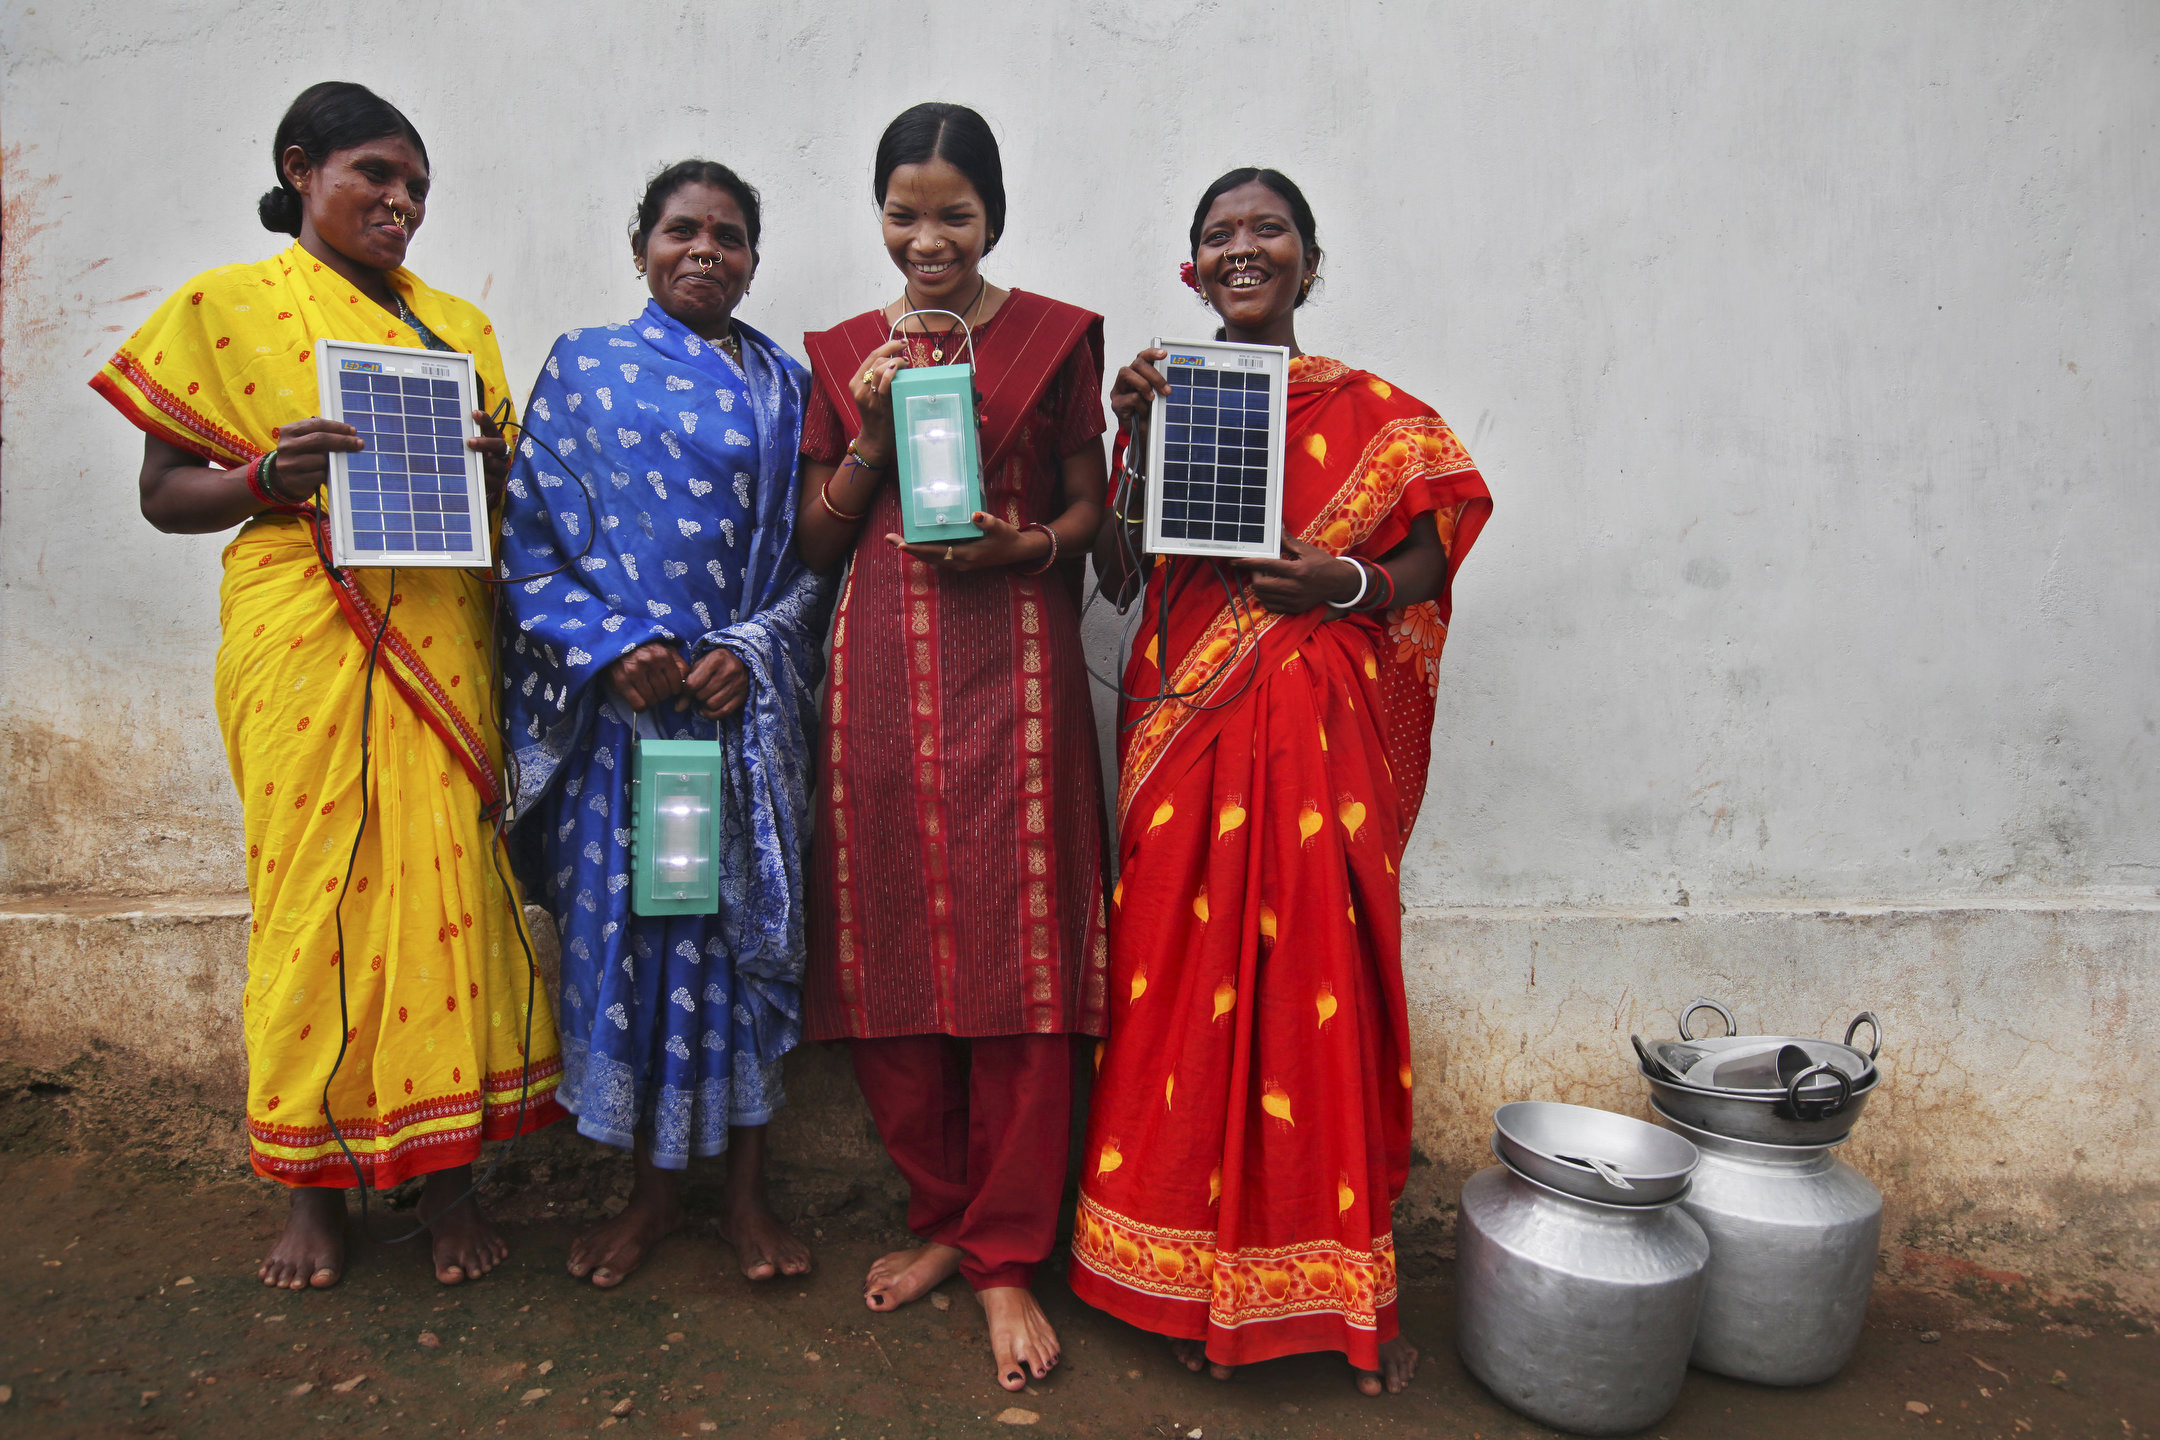 After five months training in solar power engineering, four women in Tinginaput, India are transforming their remote village - bringing light and electricity to their homes. See how they are providing a new, green path for development in our photo gallery. And find out more about the female solar engineers at: www.dfid.gov.uk/solarengineers